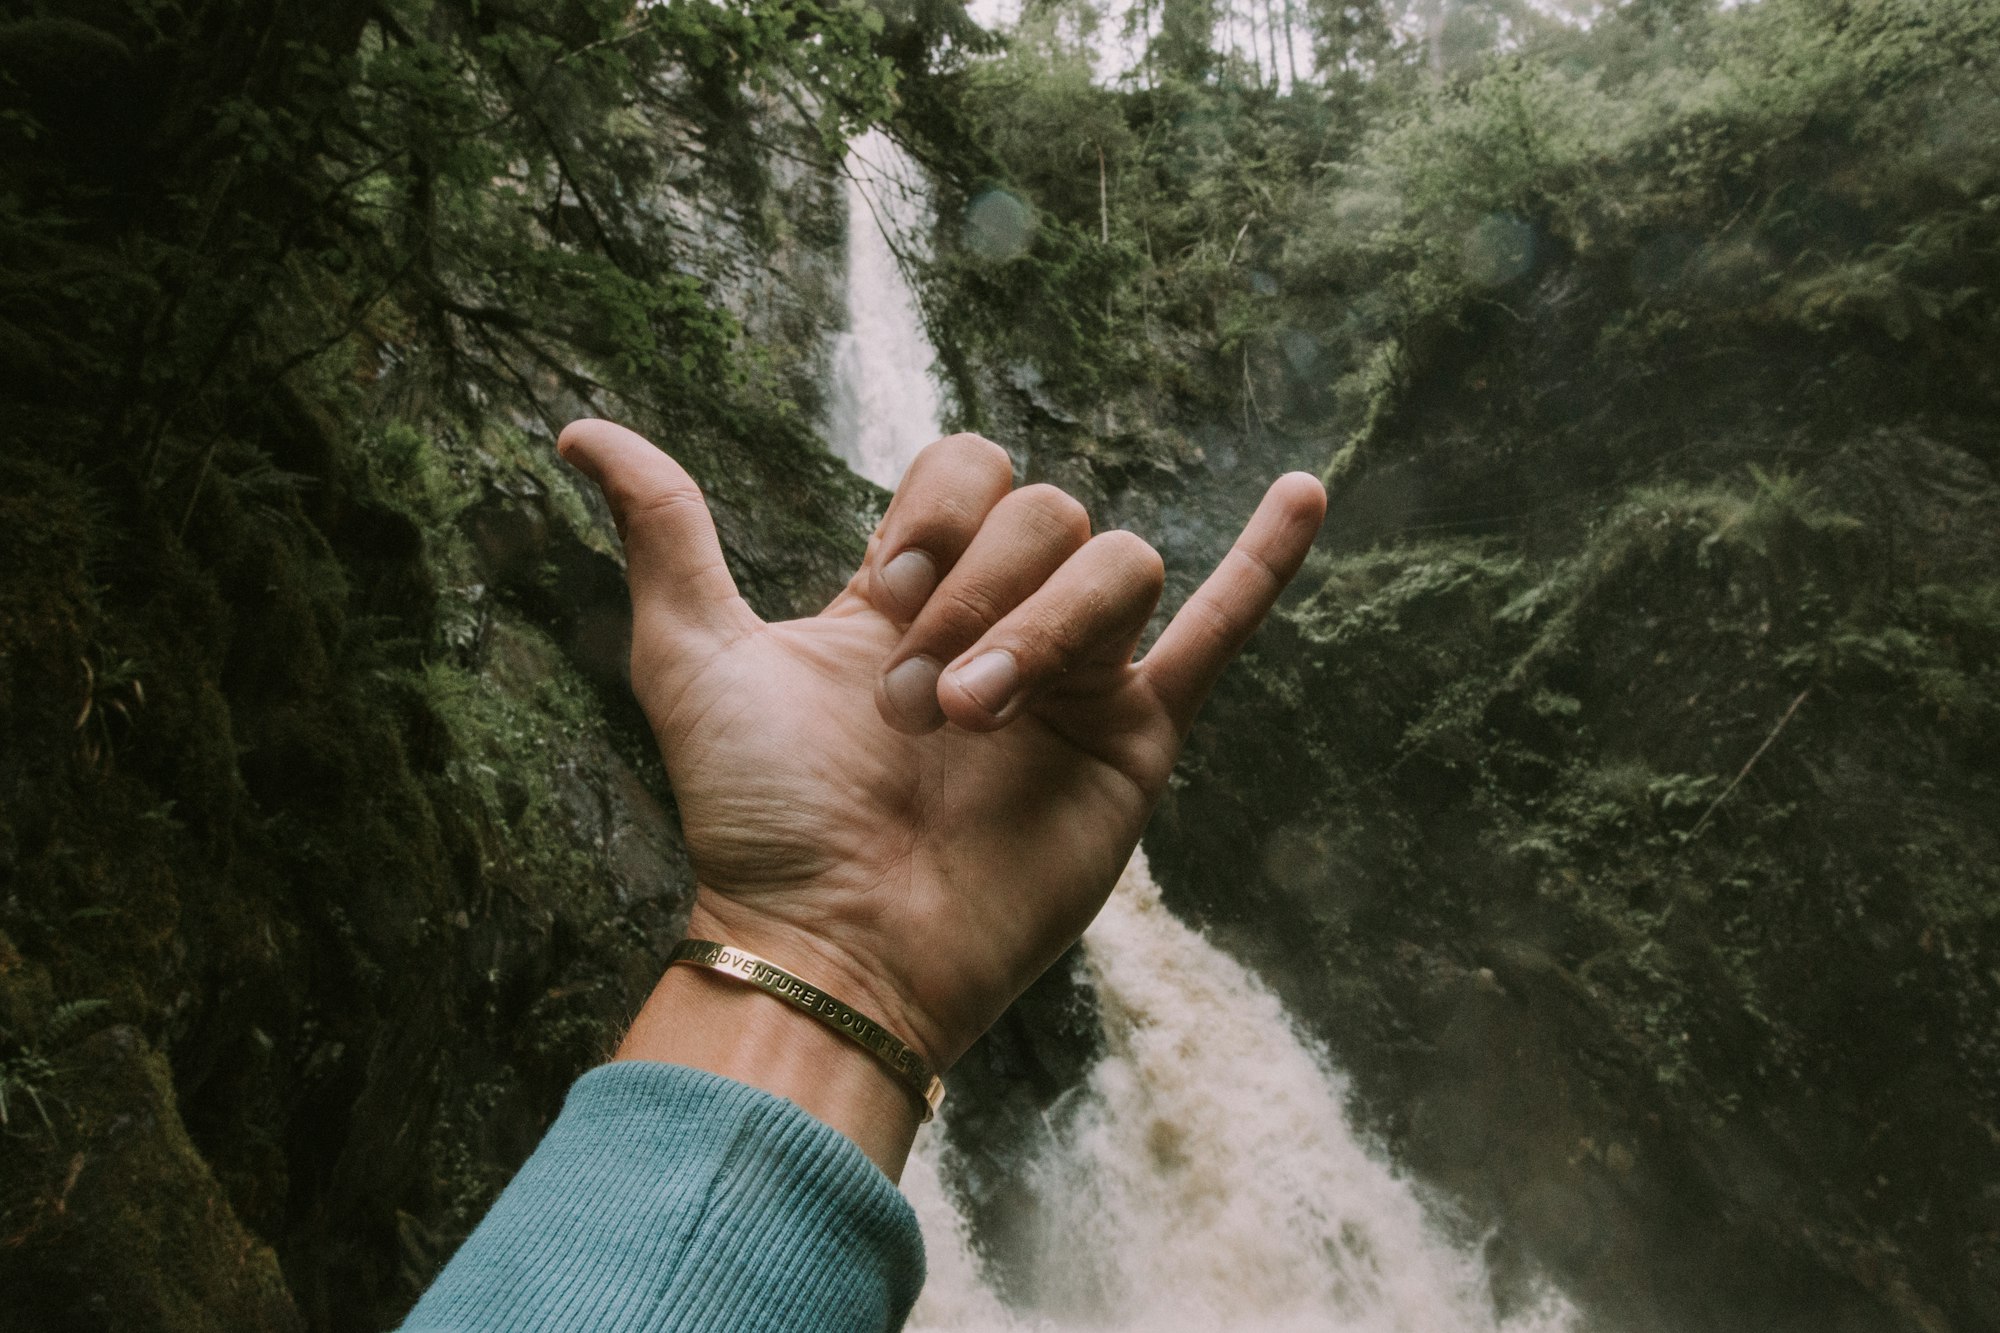 Guy at a waterfall holding up a gesture